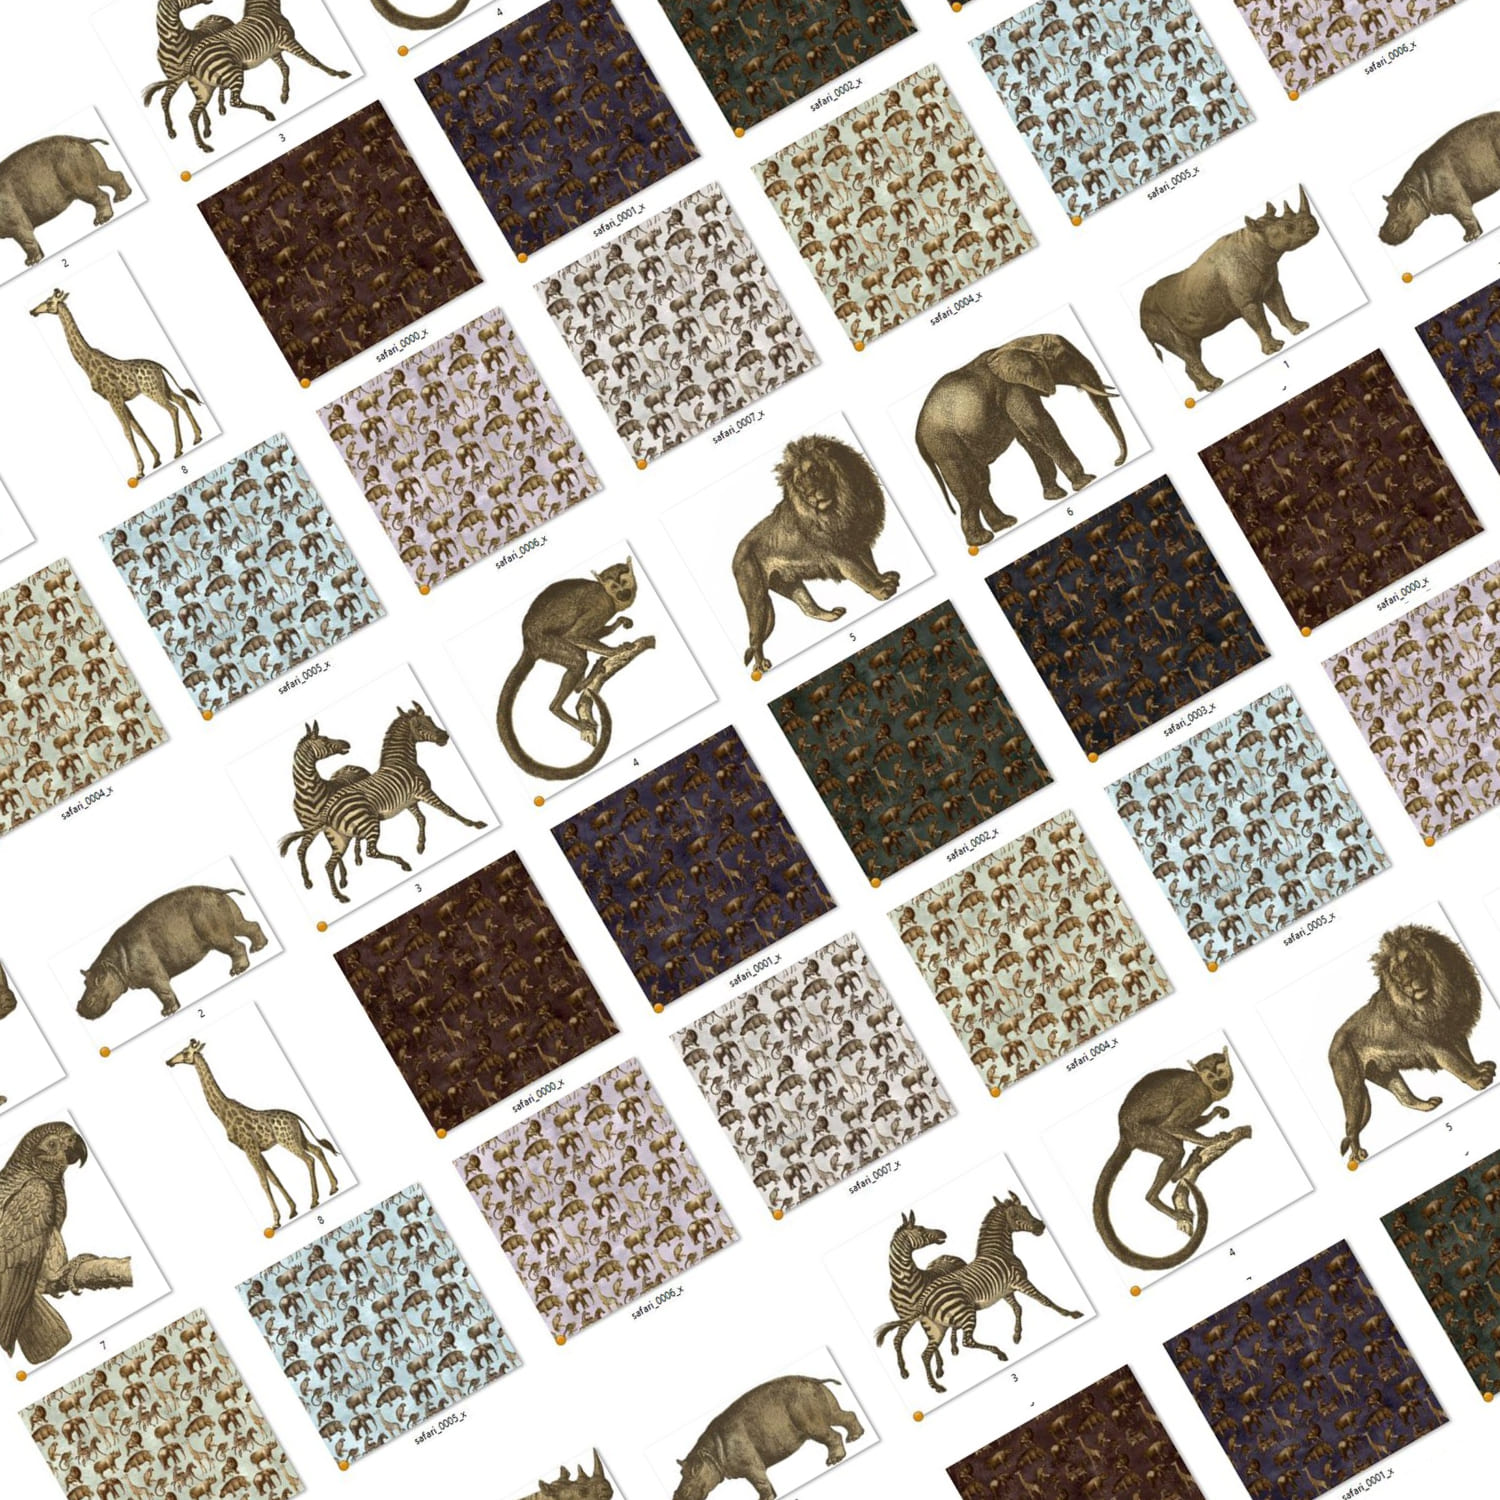 Antique Safari Patterns and Clipart cover.